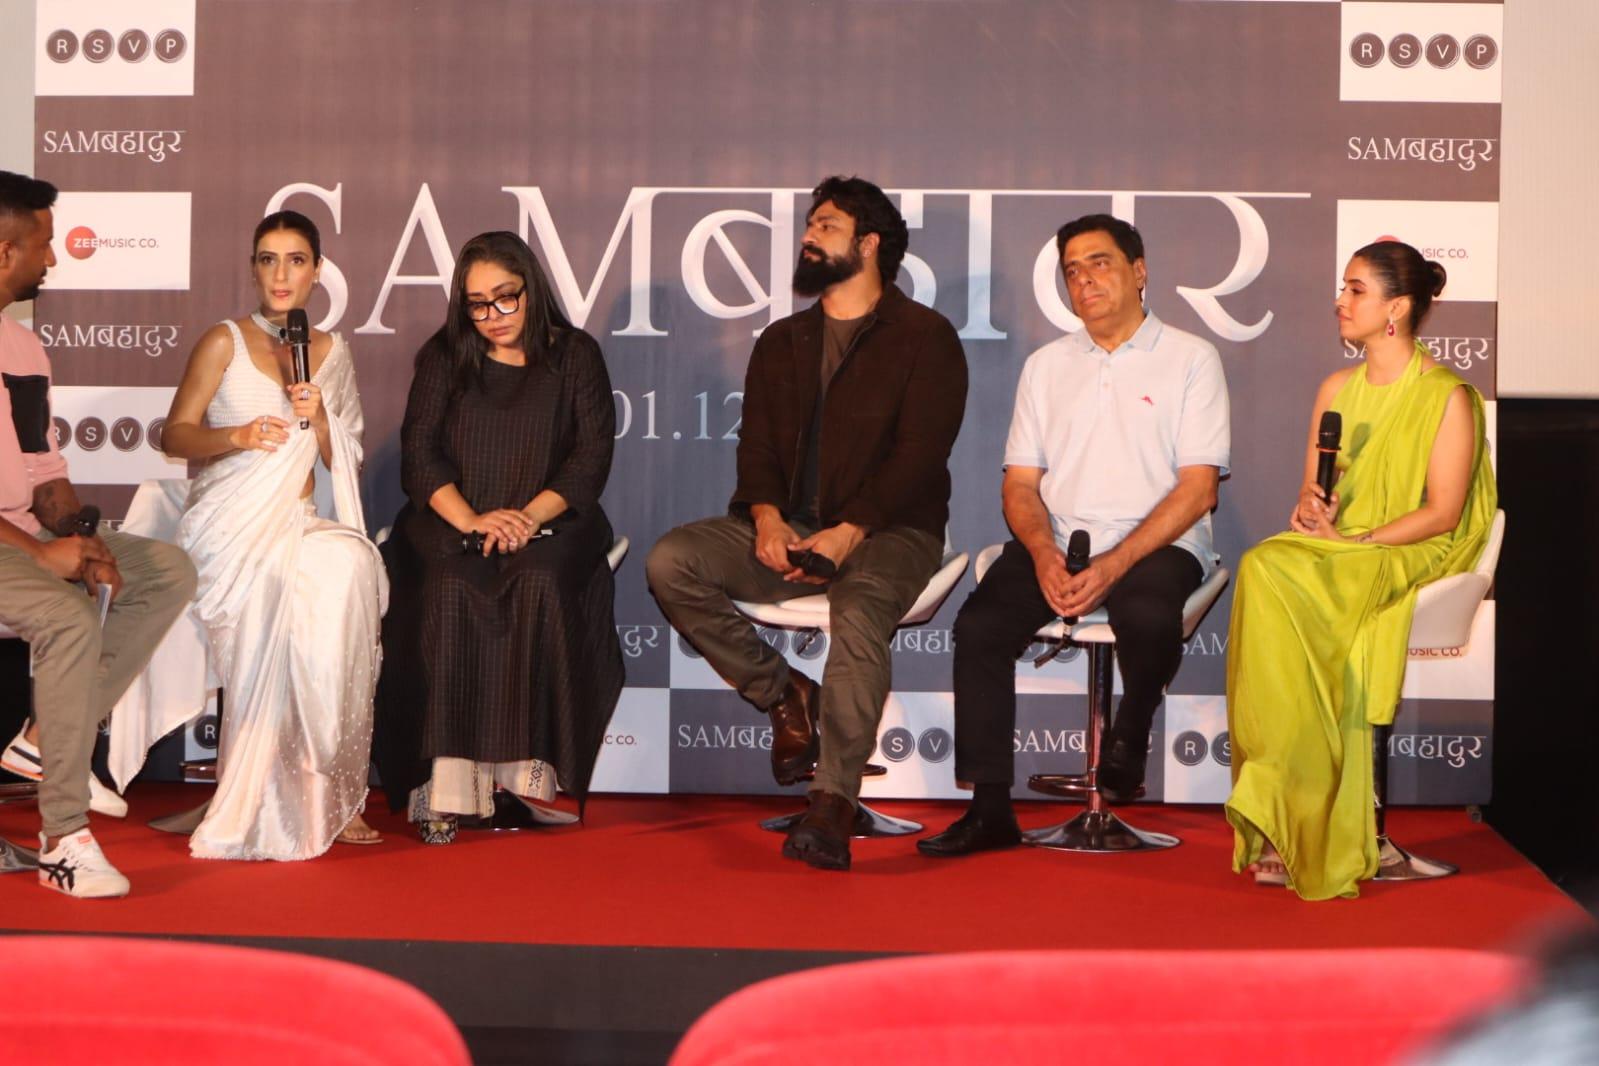 Vicky Kaushal along with the cast of Sam Bahadur attend the teaser launch event of the film